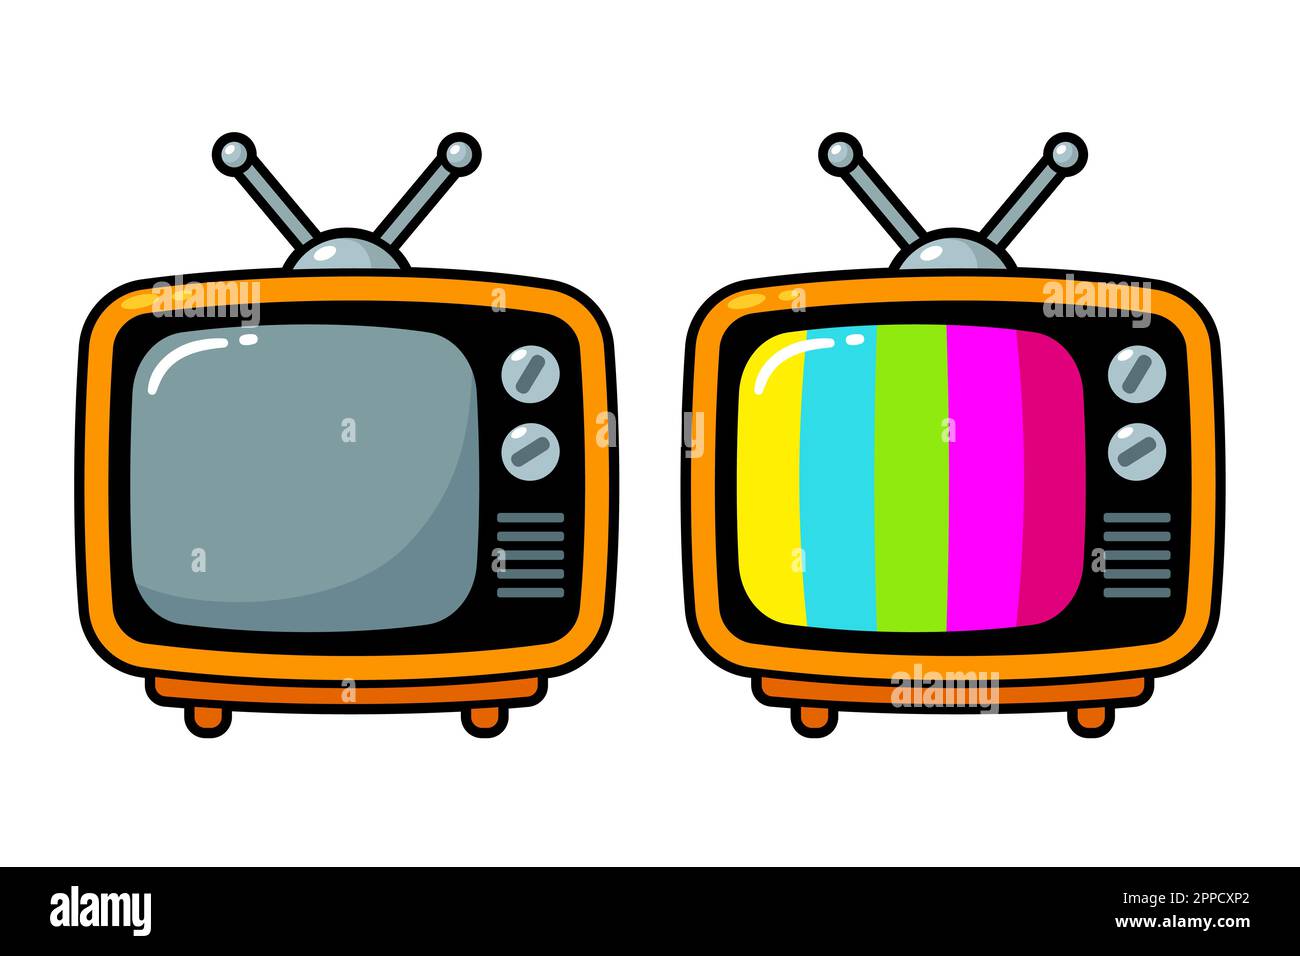 Vintage TV. Vintage television in the style of the 50s - 60s. Old TV.  Vector Retro TV on a vintage background Stock Vector